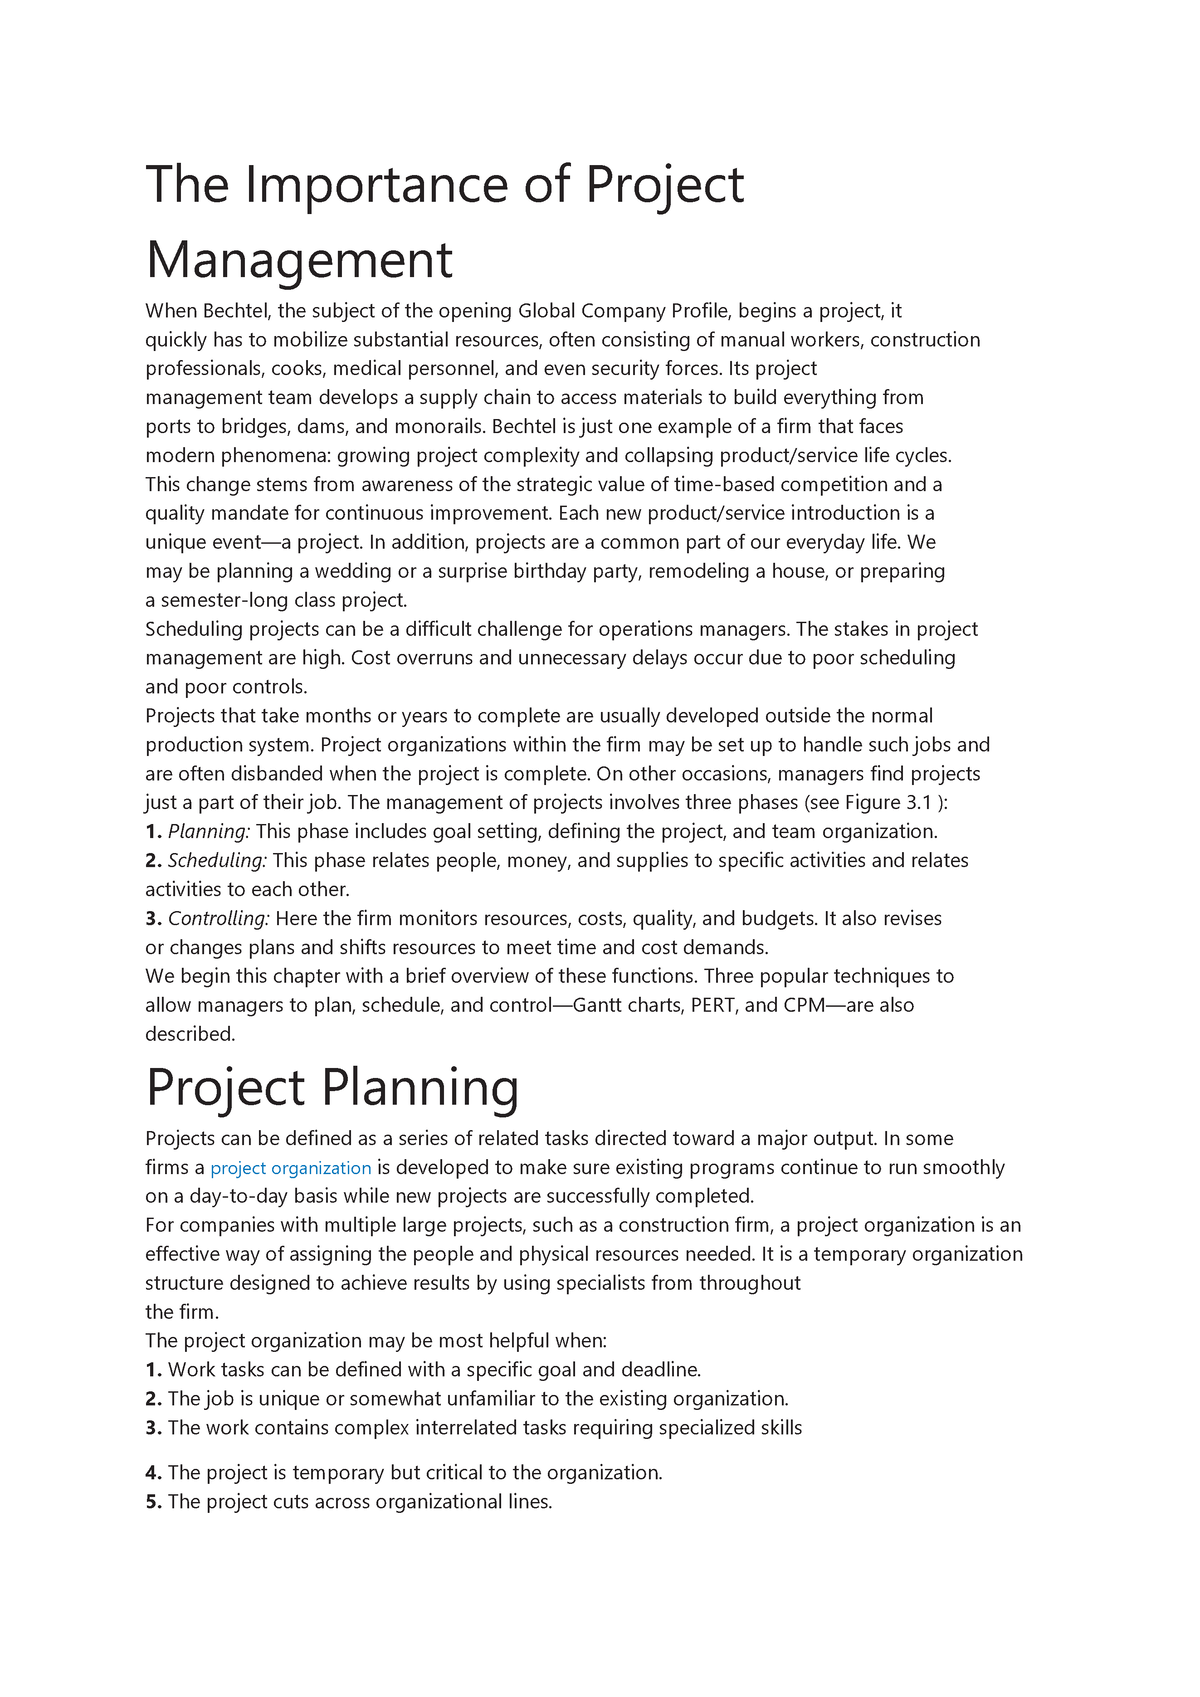 The Importance of Project Management - The Importance of Project ...